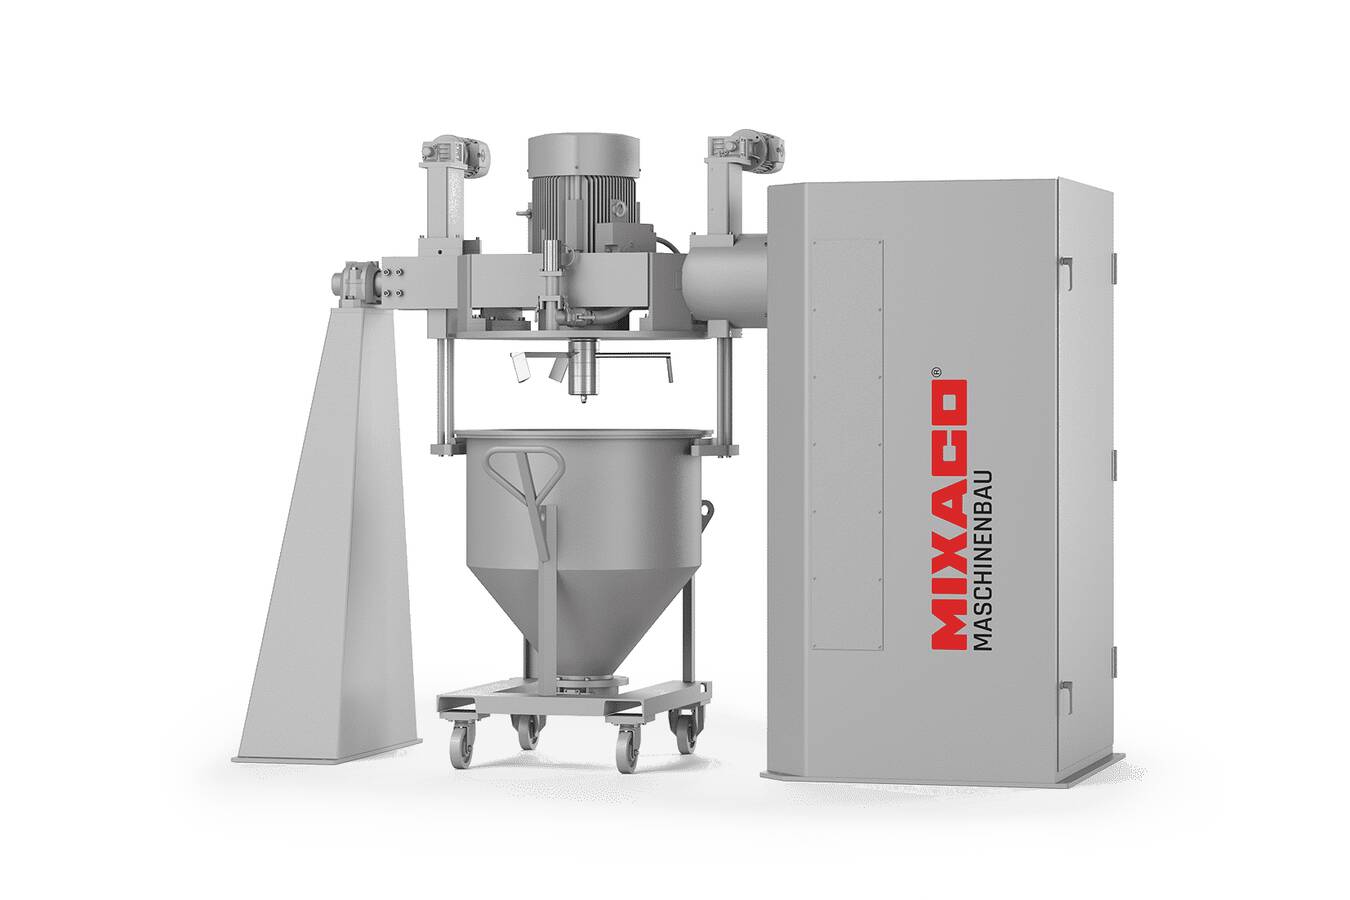 Container mixer CM i4; new generation mixers from Mixaco  Its innovative design, with a flat mixing head, and its cutting-edge software help the CM i4 achieve excellent mixing quality and flexibility with very little cleaning effort required.